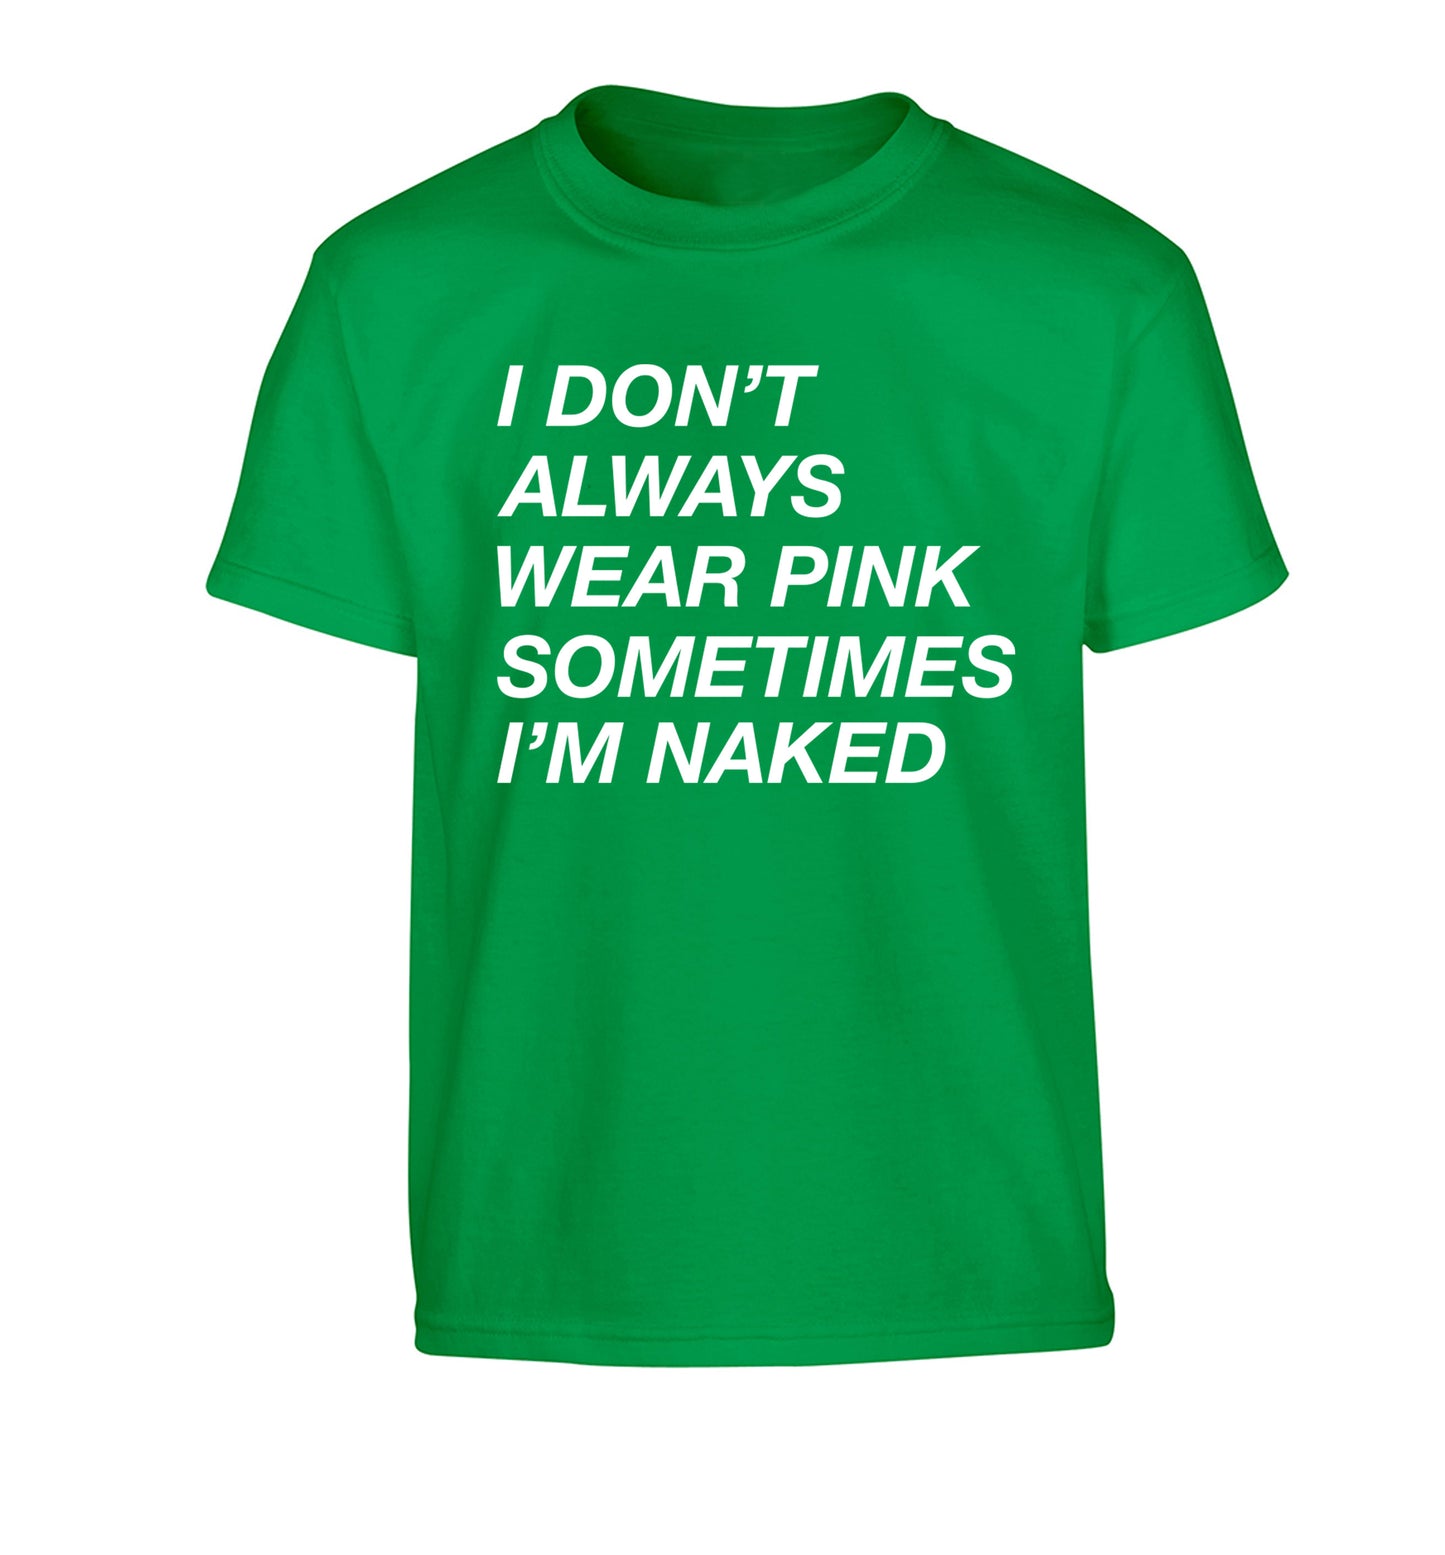 I don't always wear pink sometimes I'm naked Children's green Tshirt 12-13 Years